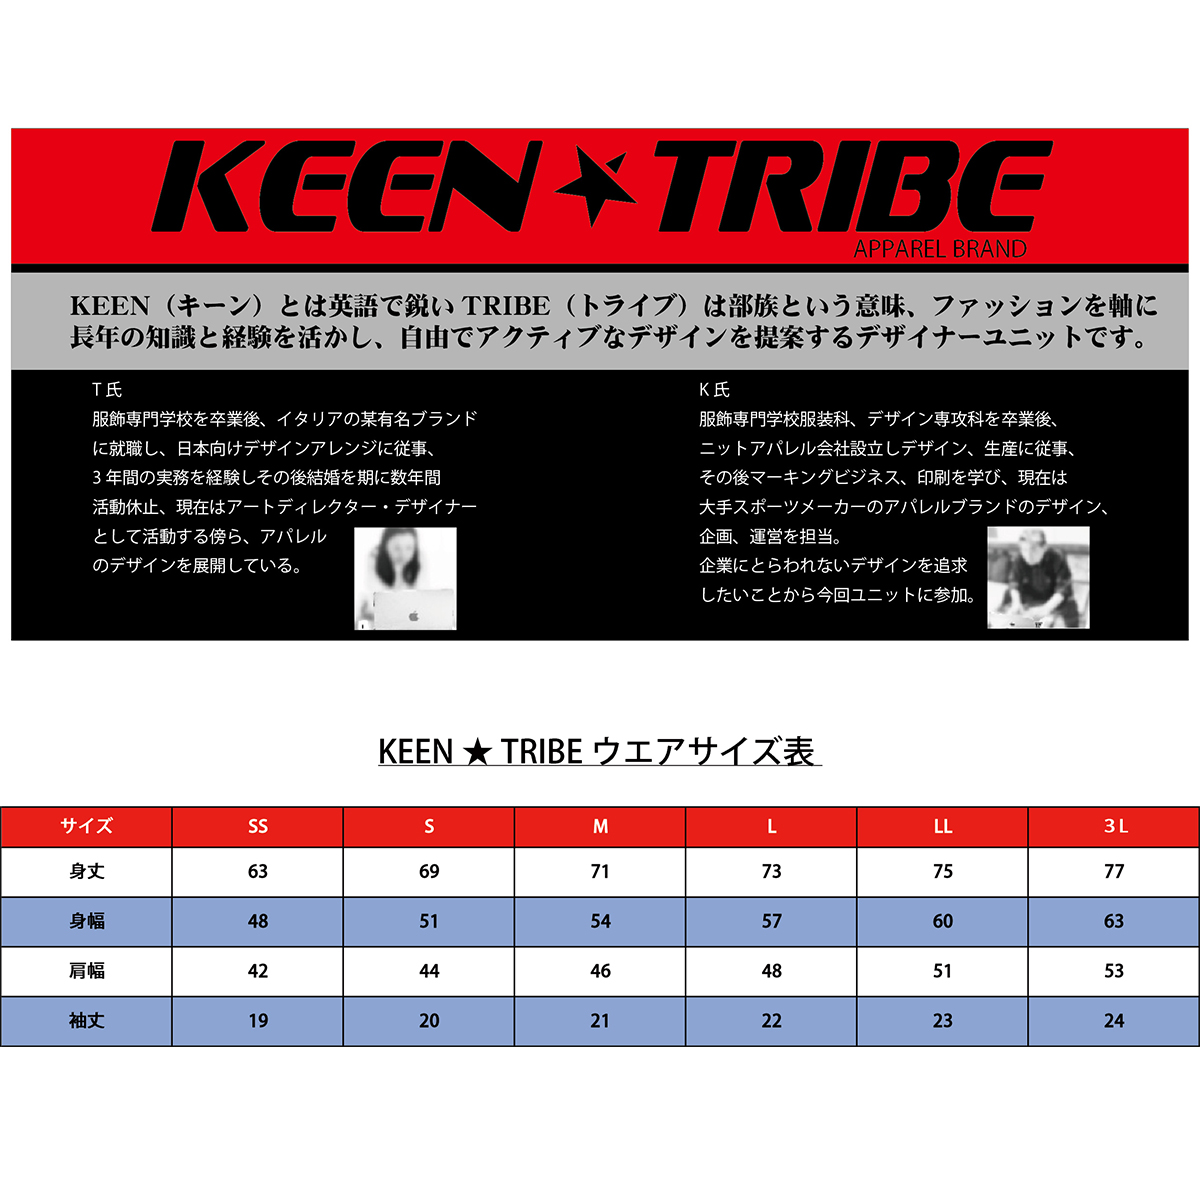 KEEN ★ TRIBE　KT-74(受注生産)